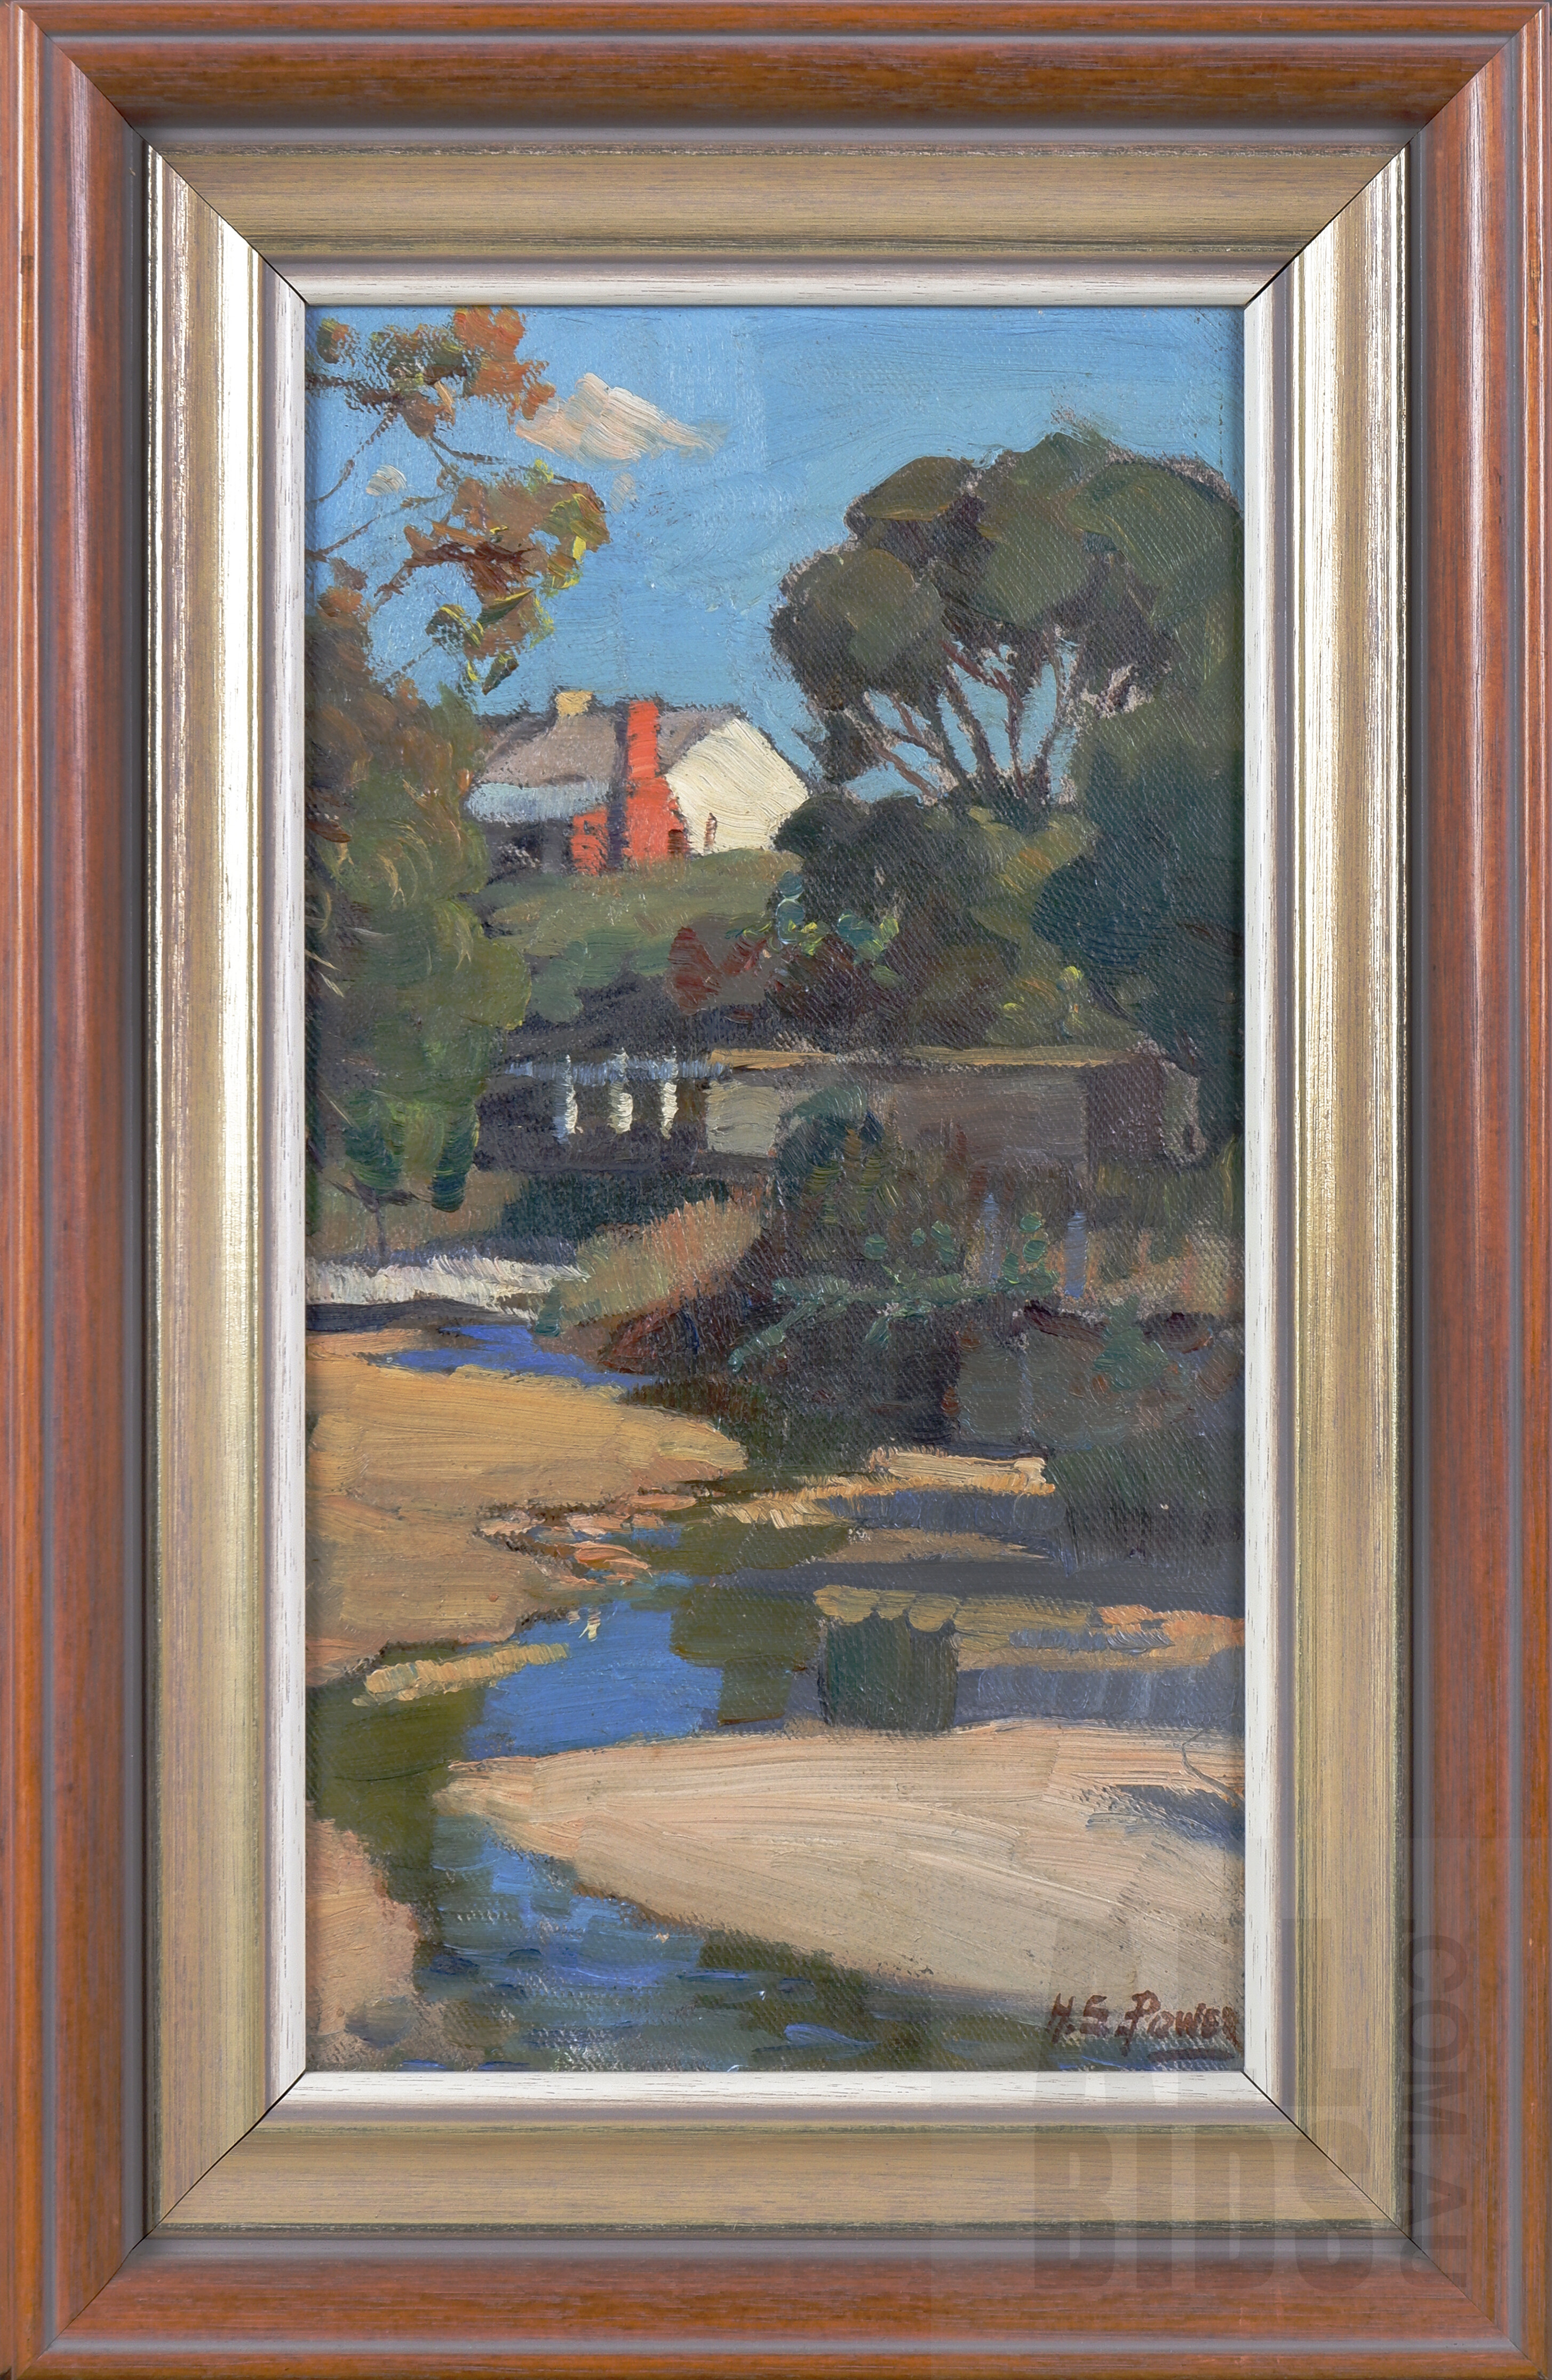 'Harold Septimus Power (1878-1951), Untitled (Creek and Cottage), Oil on Canvas on Board, 30 x 15 cm'